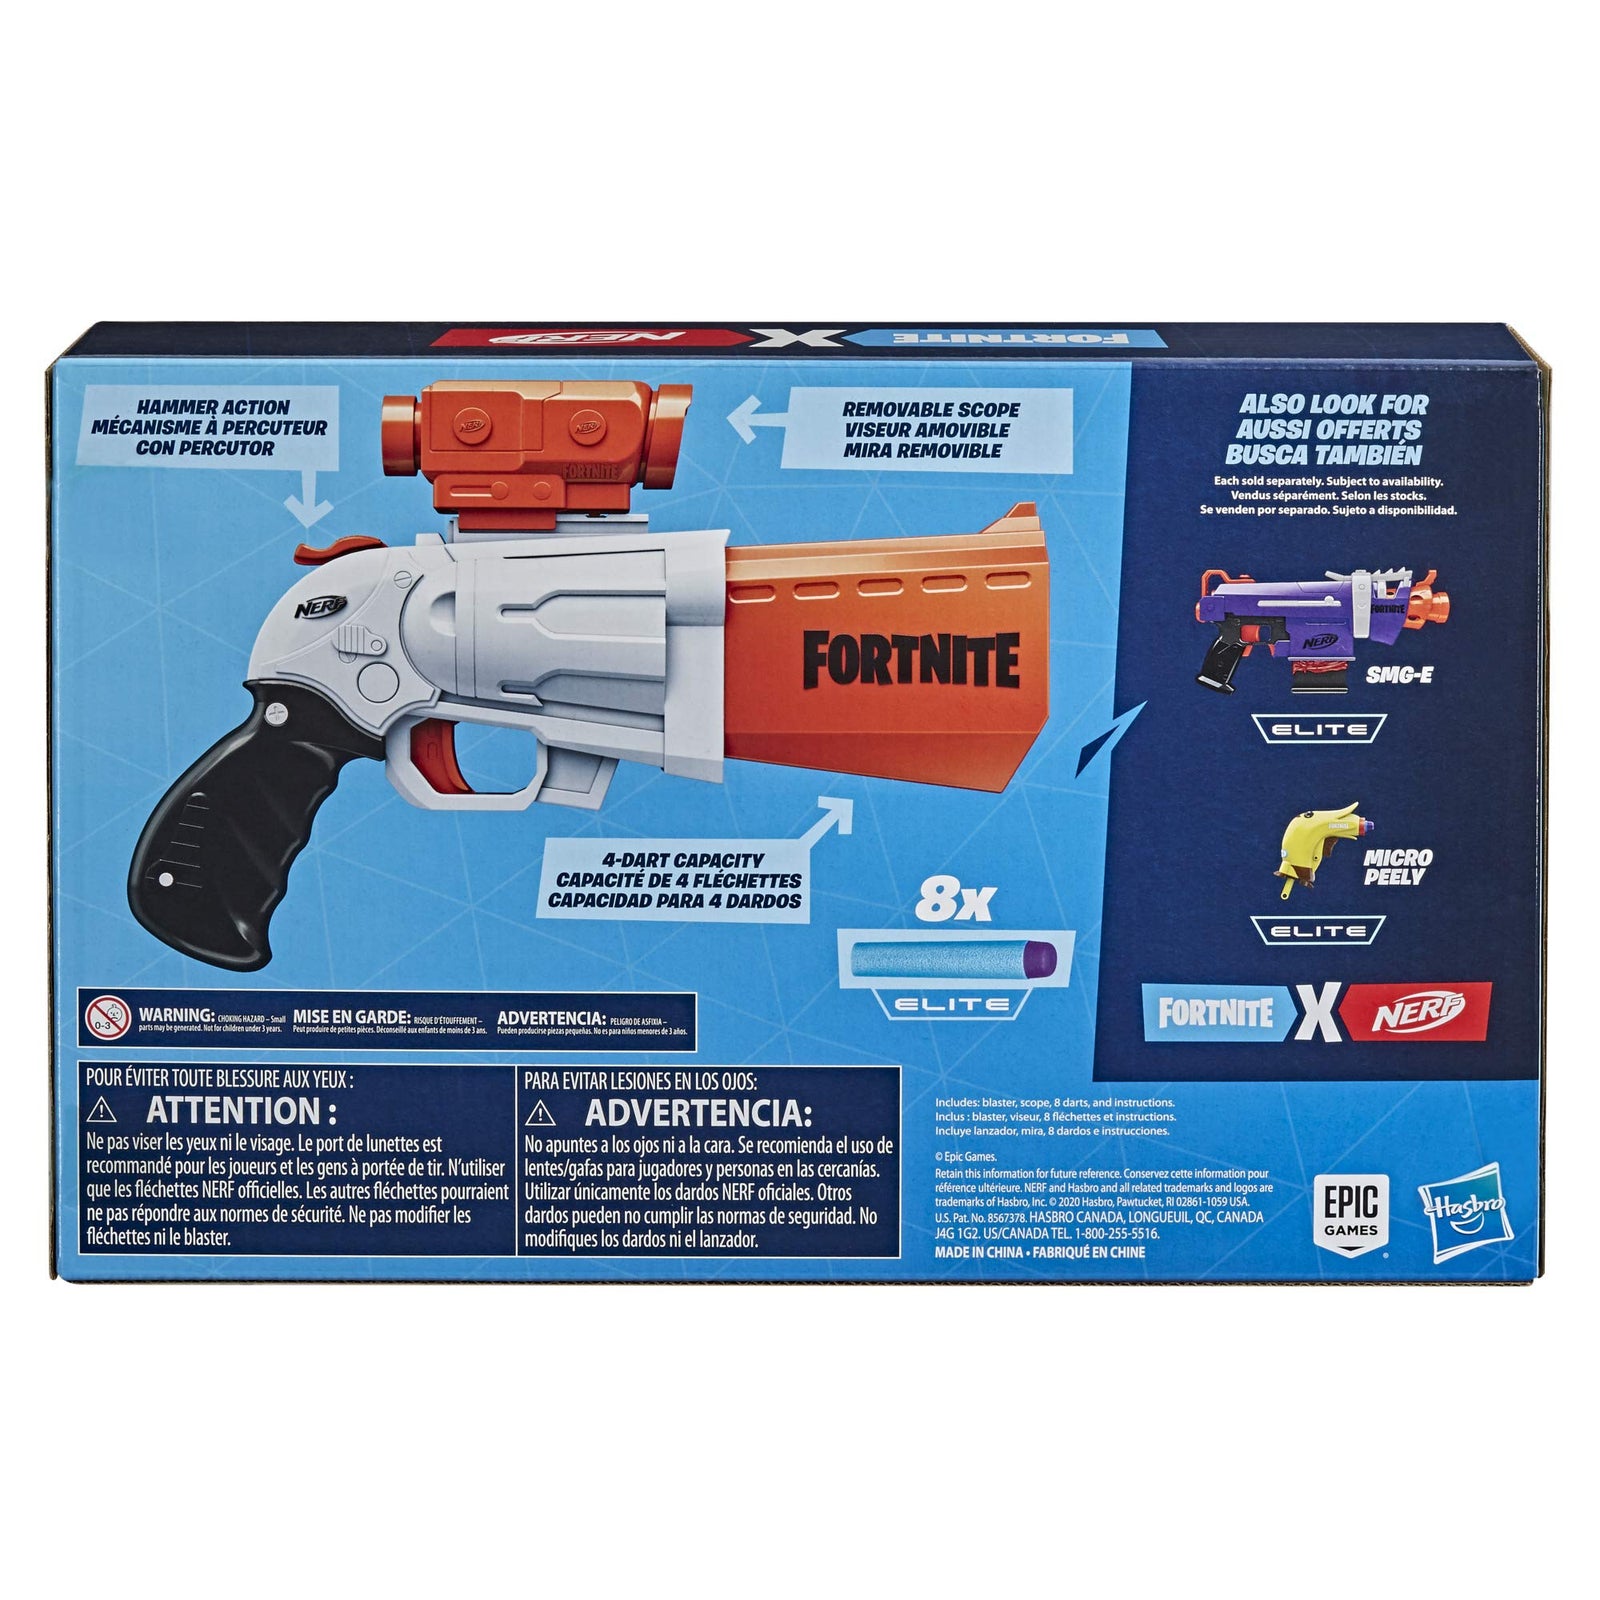 NERF Fortnite SR Blaster -- 4-Dart Hammer Action -- Includes Removable Scope and 8 Official Elite Darts -- for Youth, Teens, Adults